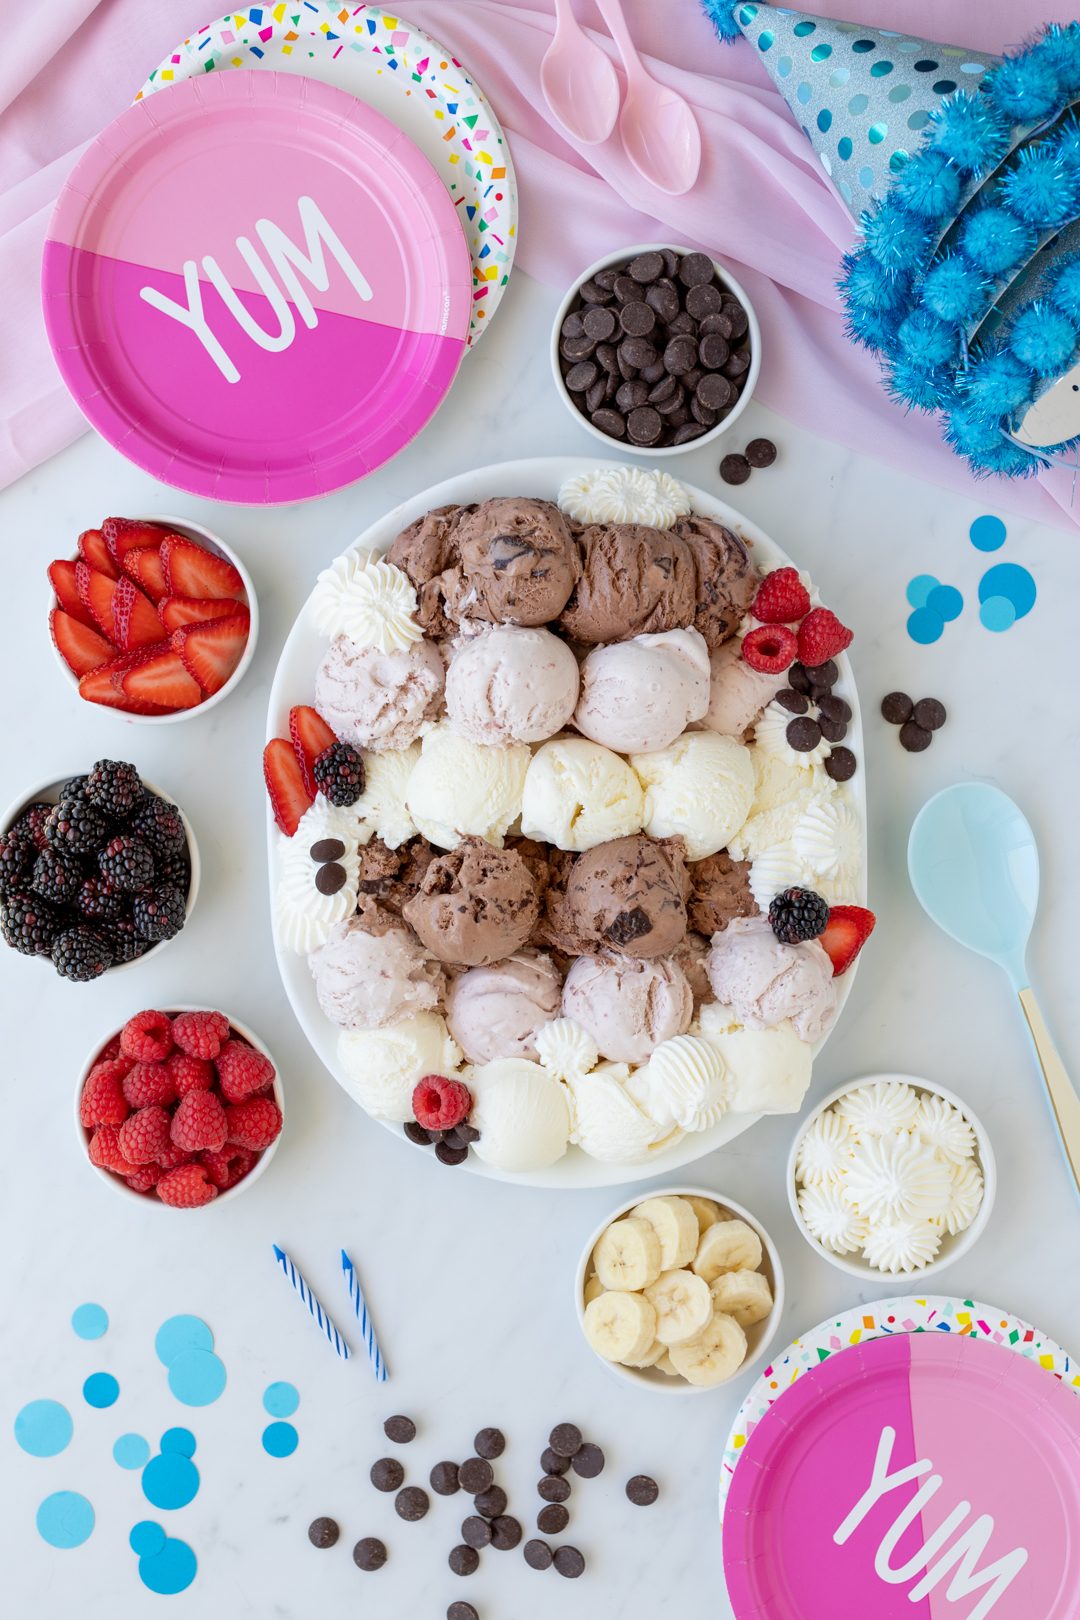 diy ice cream scoop party platter to celebrate any occasion.